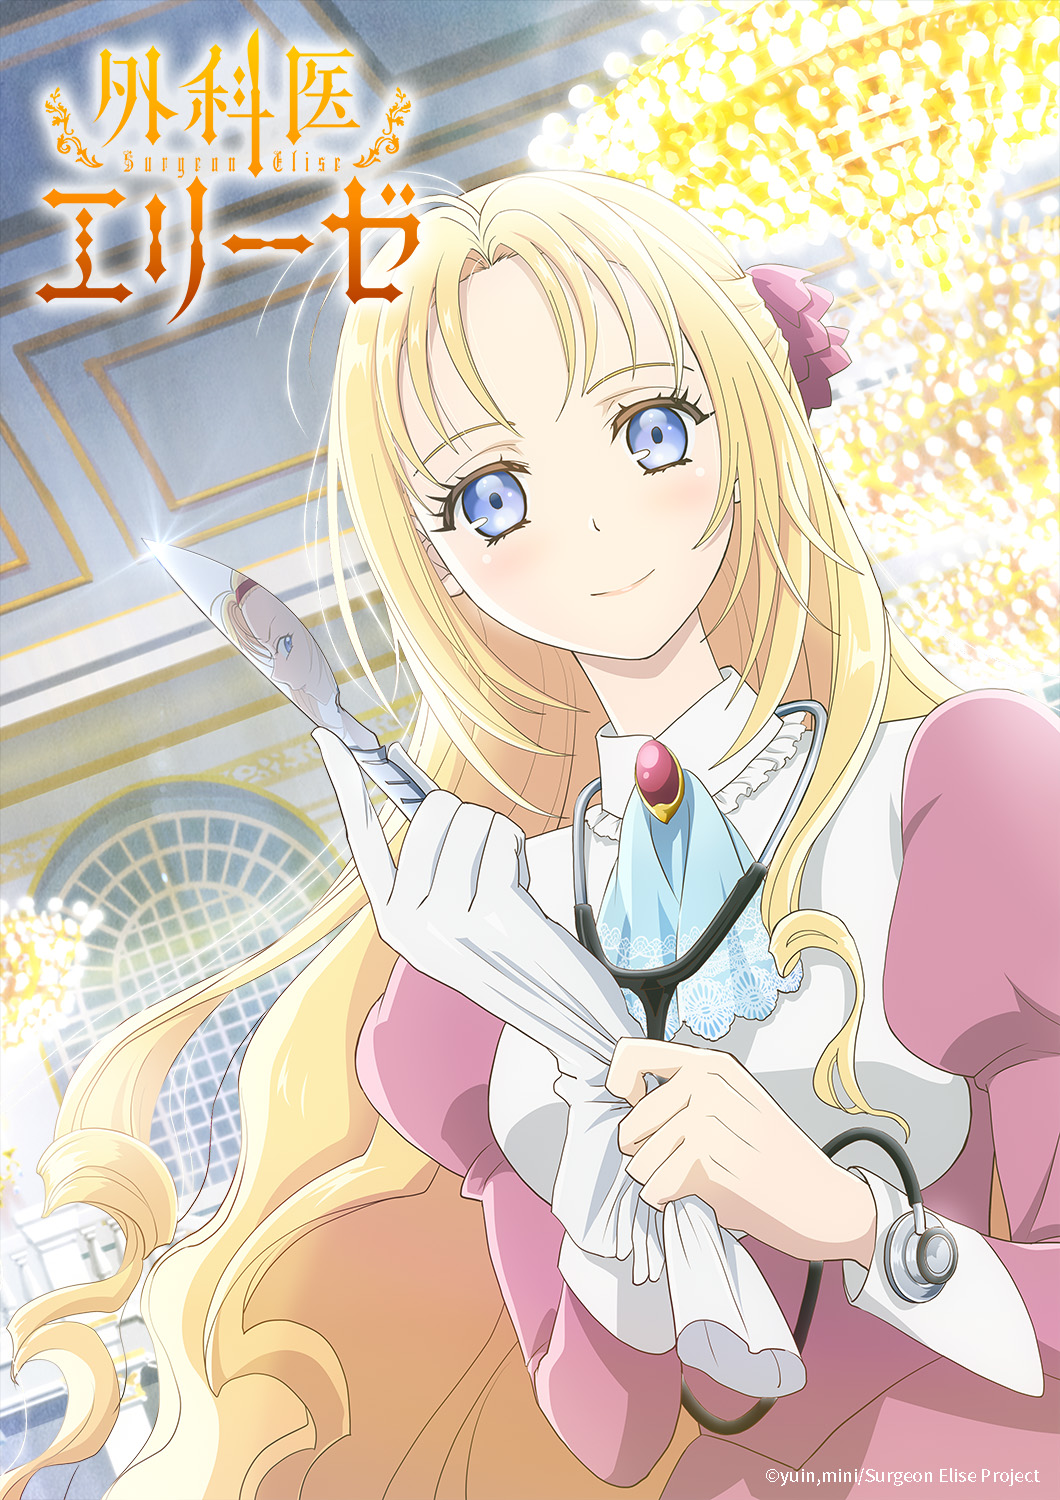 A key visual for the upcoming Surgeon Elise TV anime featuring artwork of Elise - a blonde-haired, blue-eyed woman dressed as a noblewoman with a stethoscope, scalpel, and surgical gloves - standing in front of a chandelier in an elaborate palace ballroom.